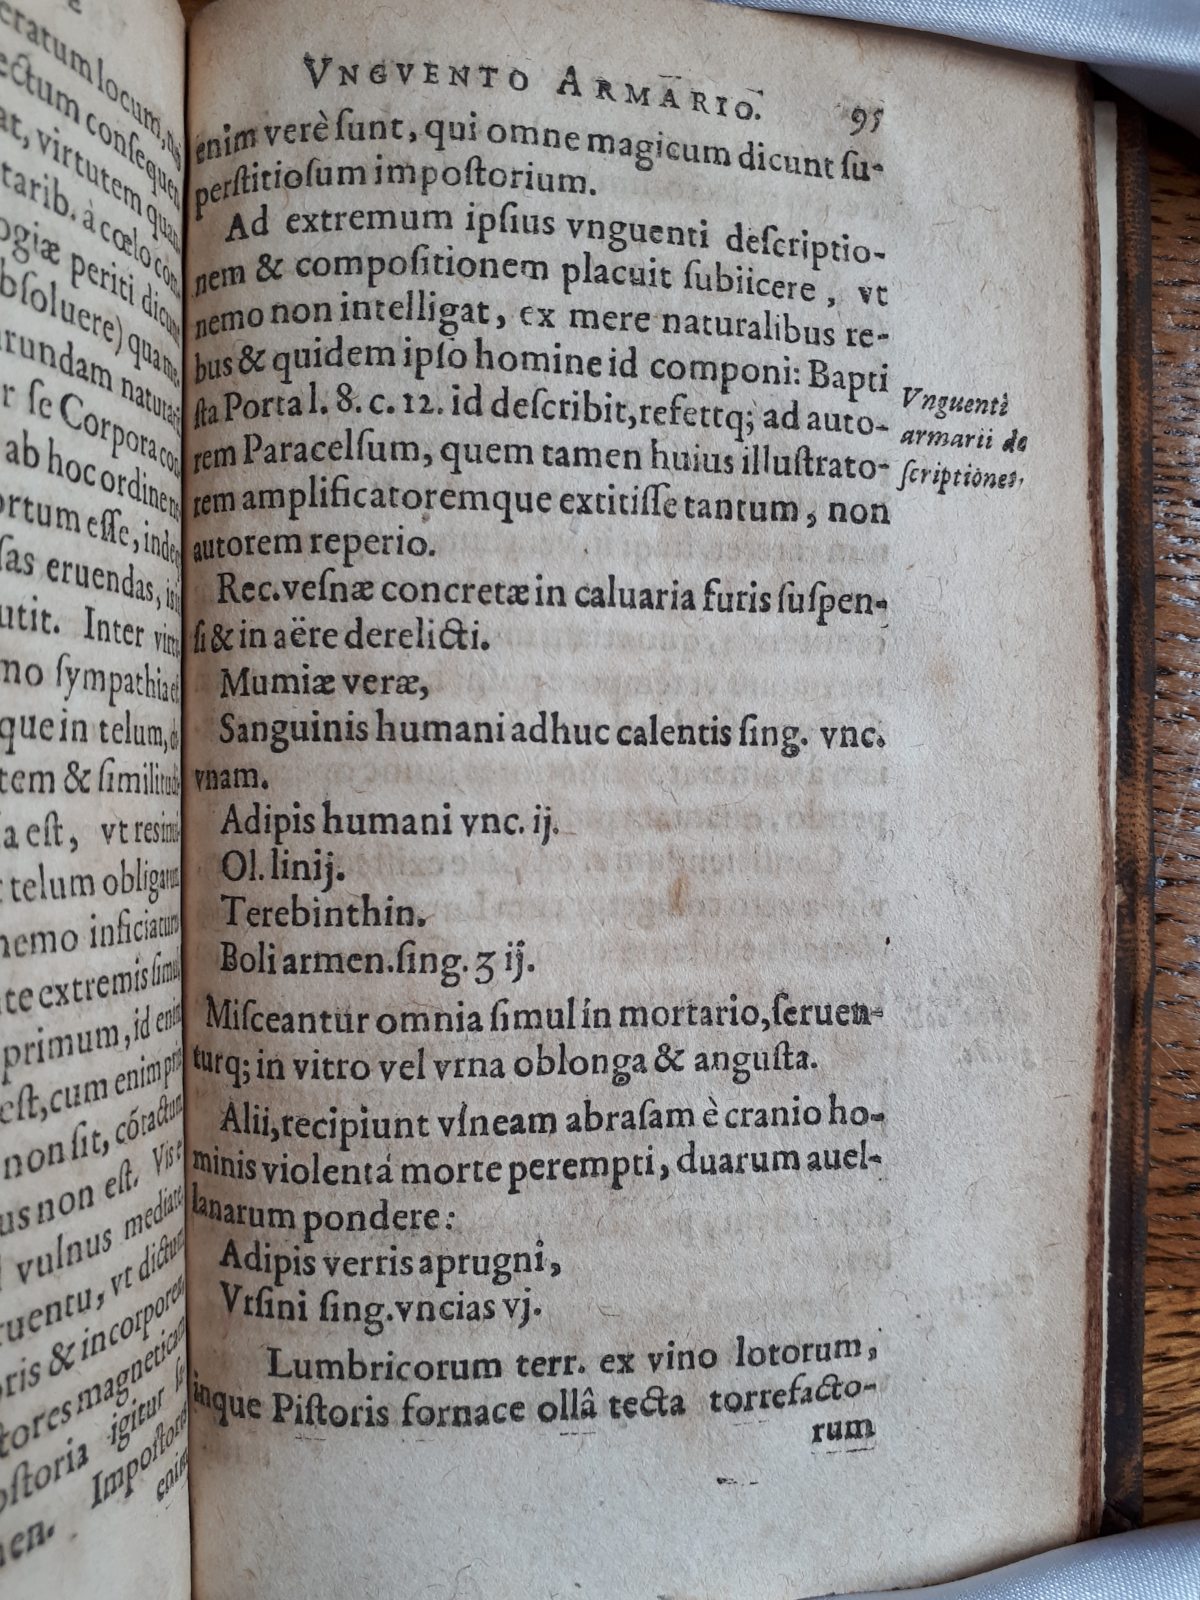 Page 95 in a 17th-century printed book, with a single column of Latin text incorporating a list of seven items.